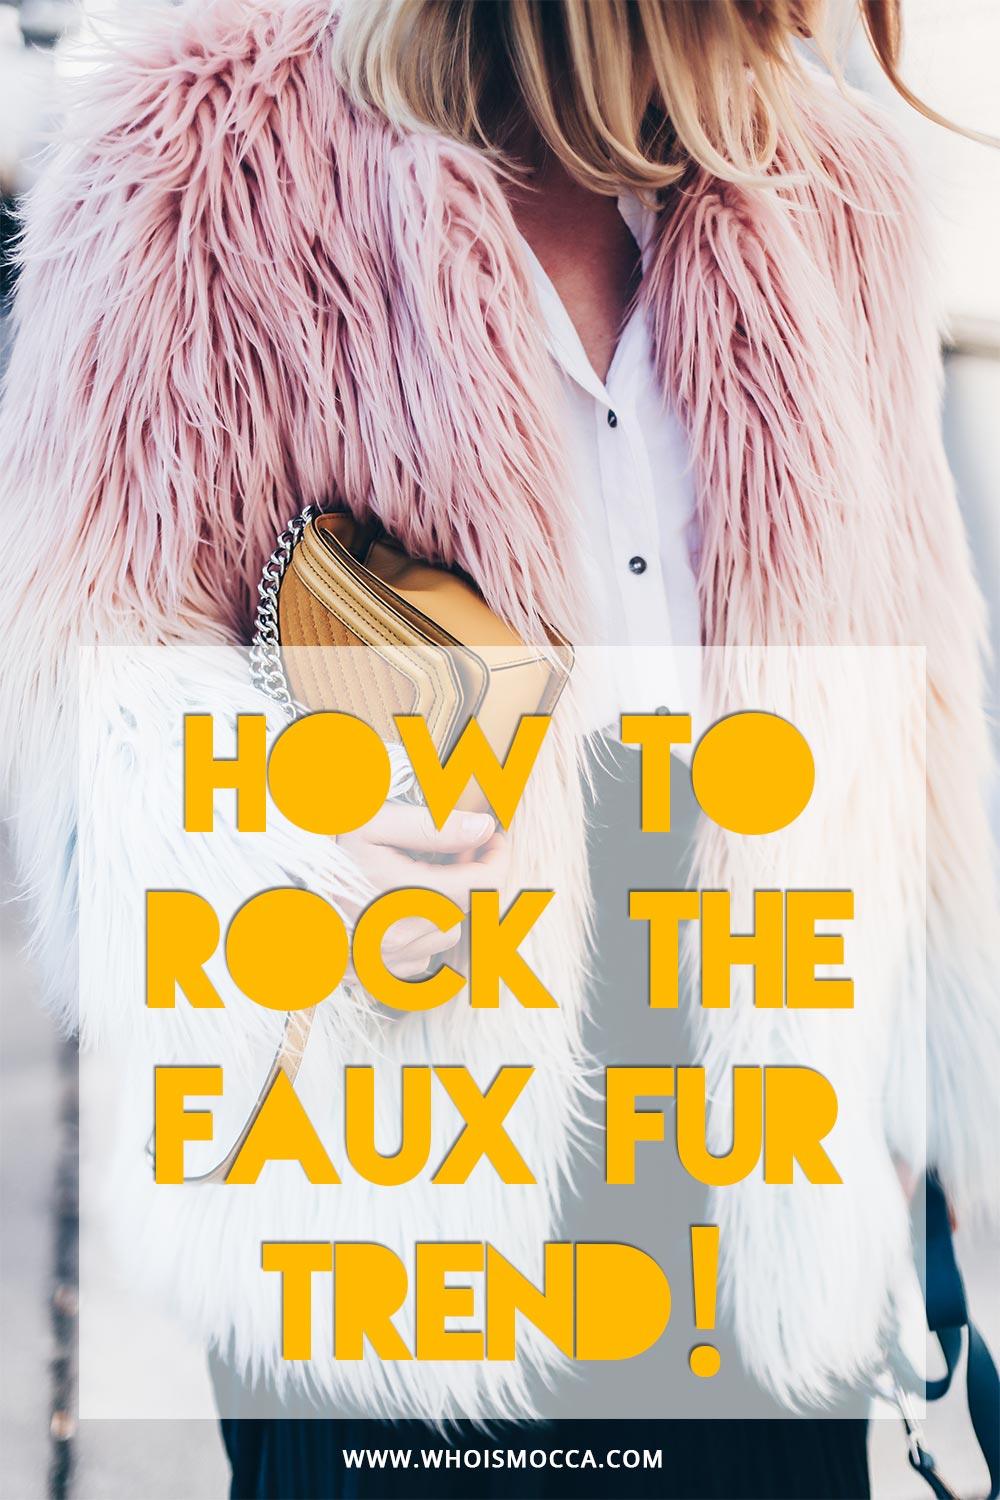 how to rock the faux fur trend, Winter Outfit, American Retro Fake Fur Jacke, Streetstyle, Samtculotte, Outfit Blog, Style Blog, Fashionblog, Modeblog, whoismocca.com